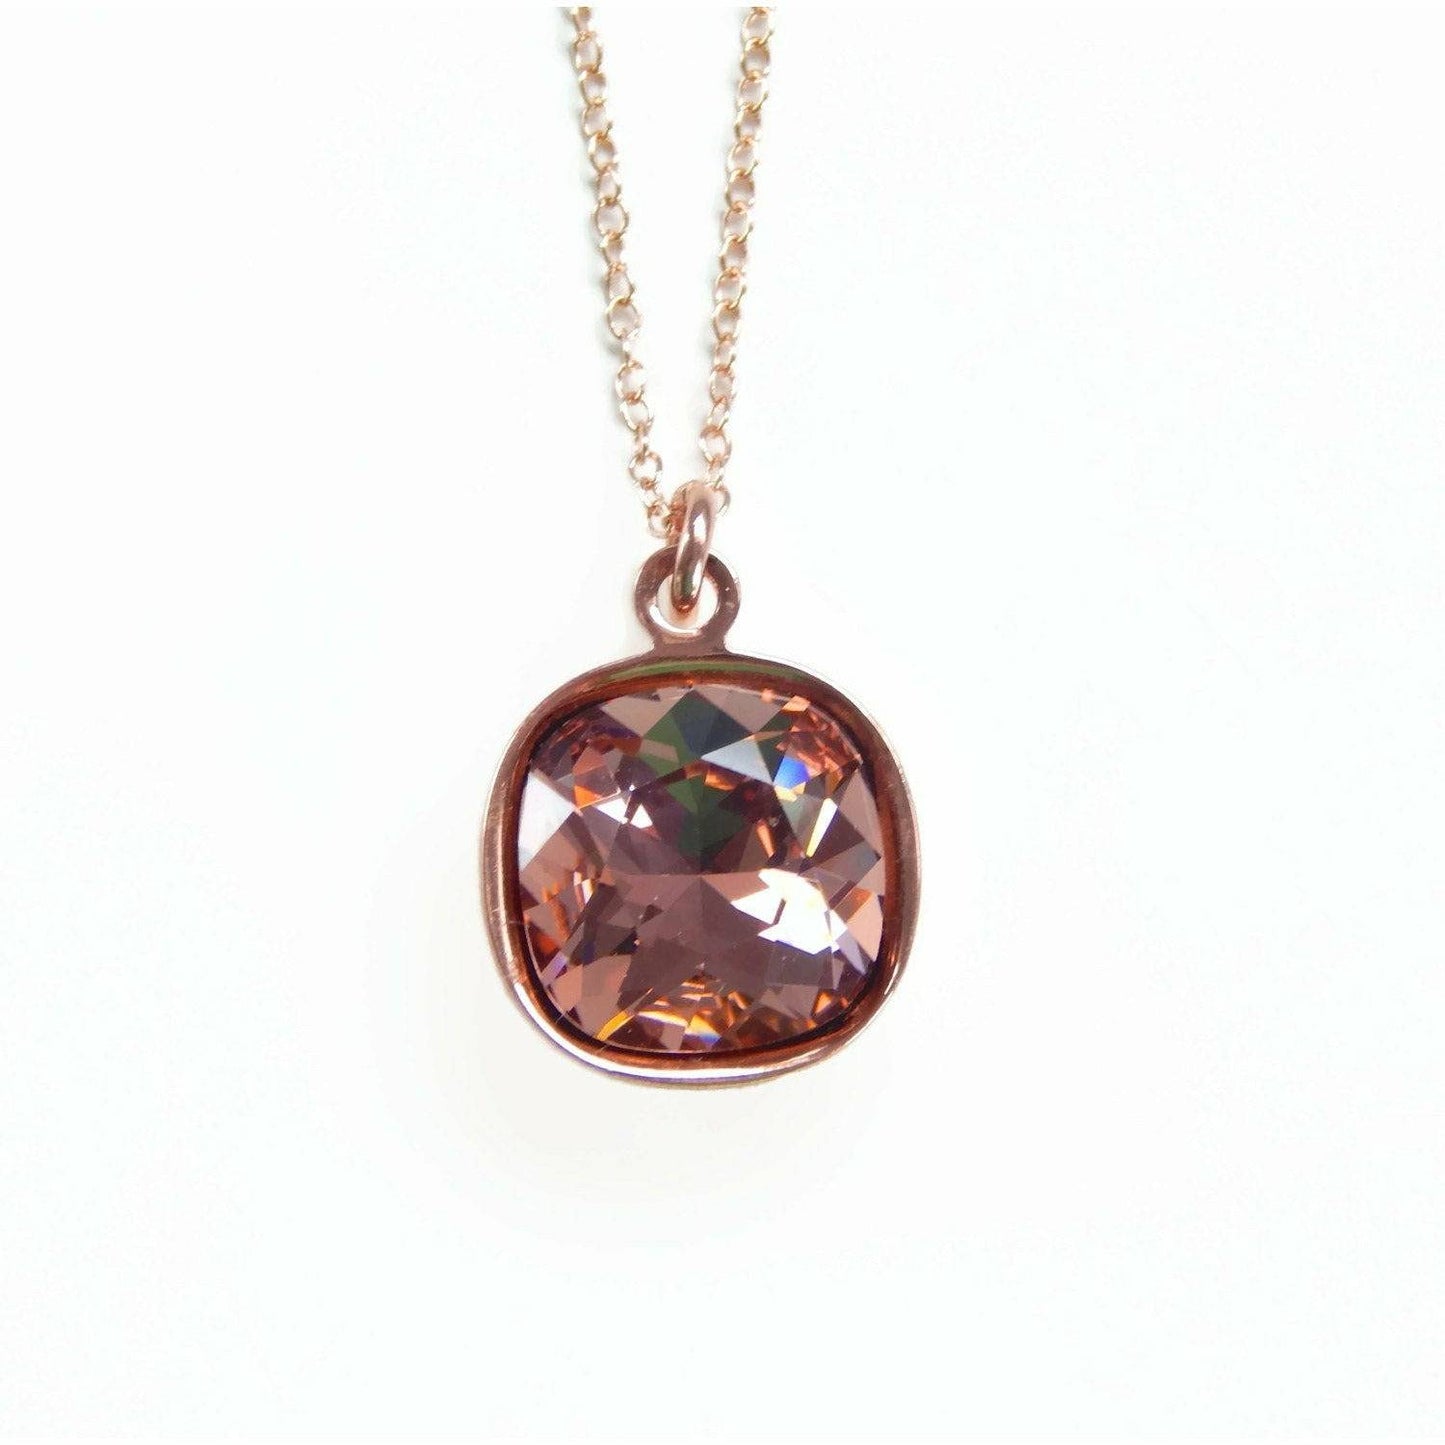 Blush crystal and rose gold necklace